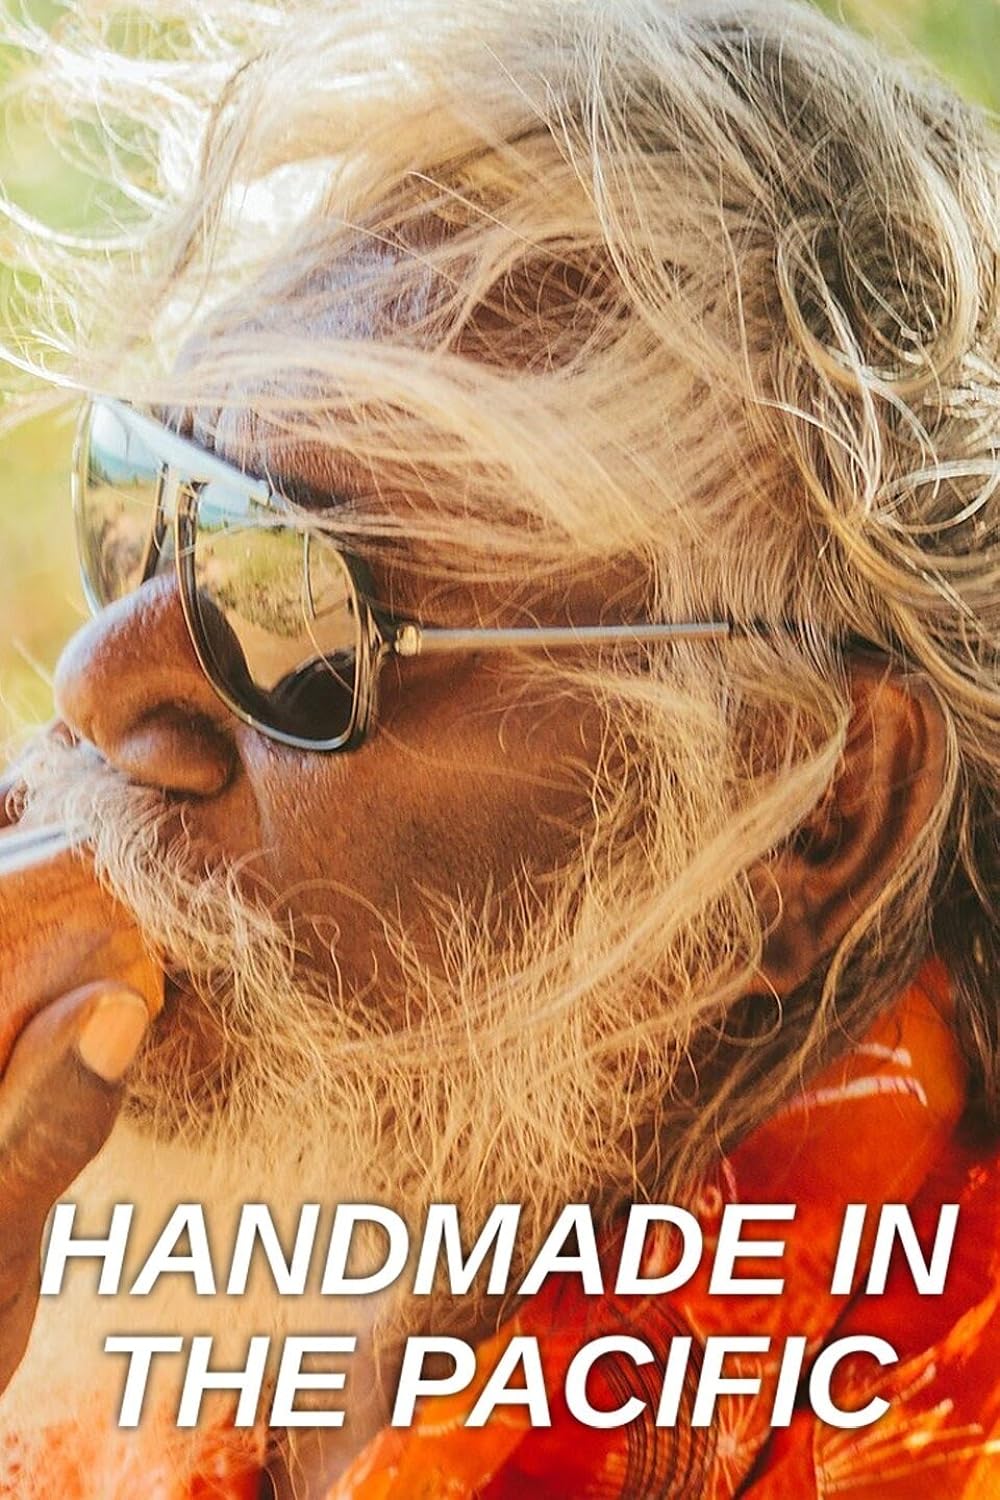 Handmade in the Pacific